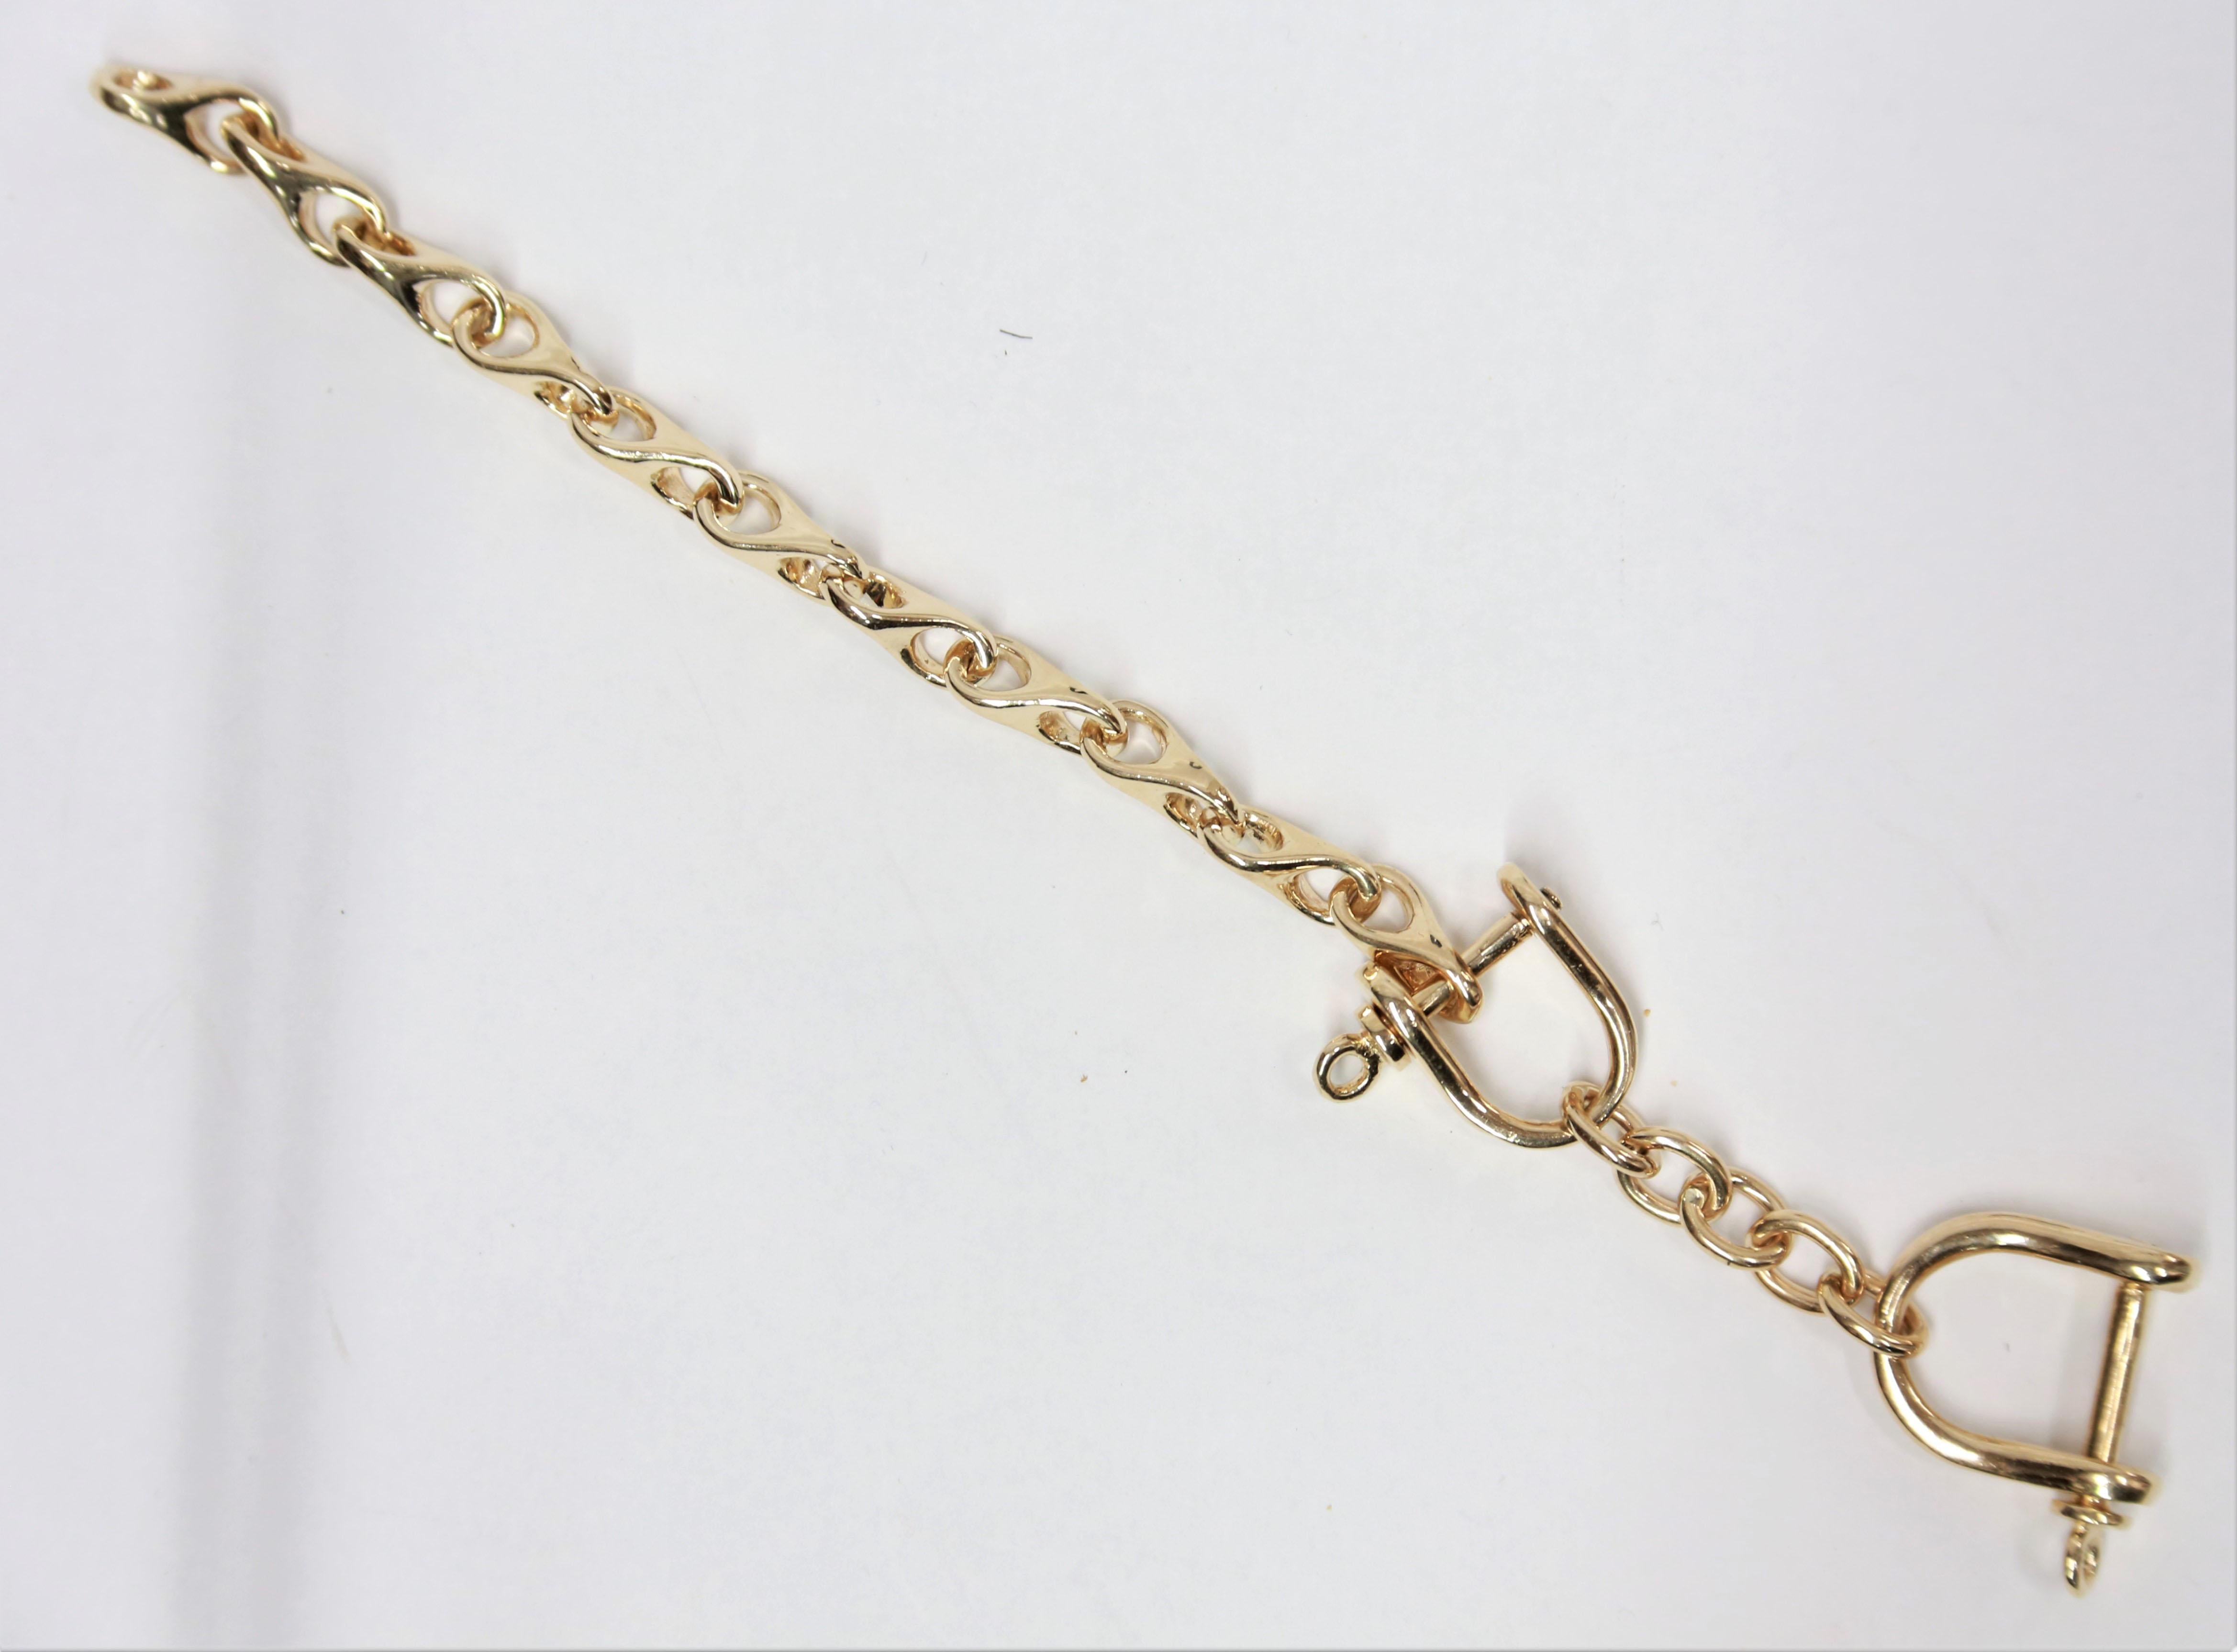 Iconic Gold Stirrup Bracelet; Hand crafted in heavy solid 14 Karat yellow. Bracelet measures approx. 8.5